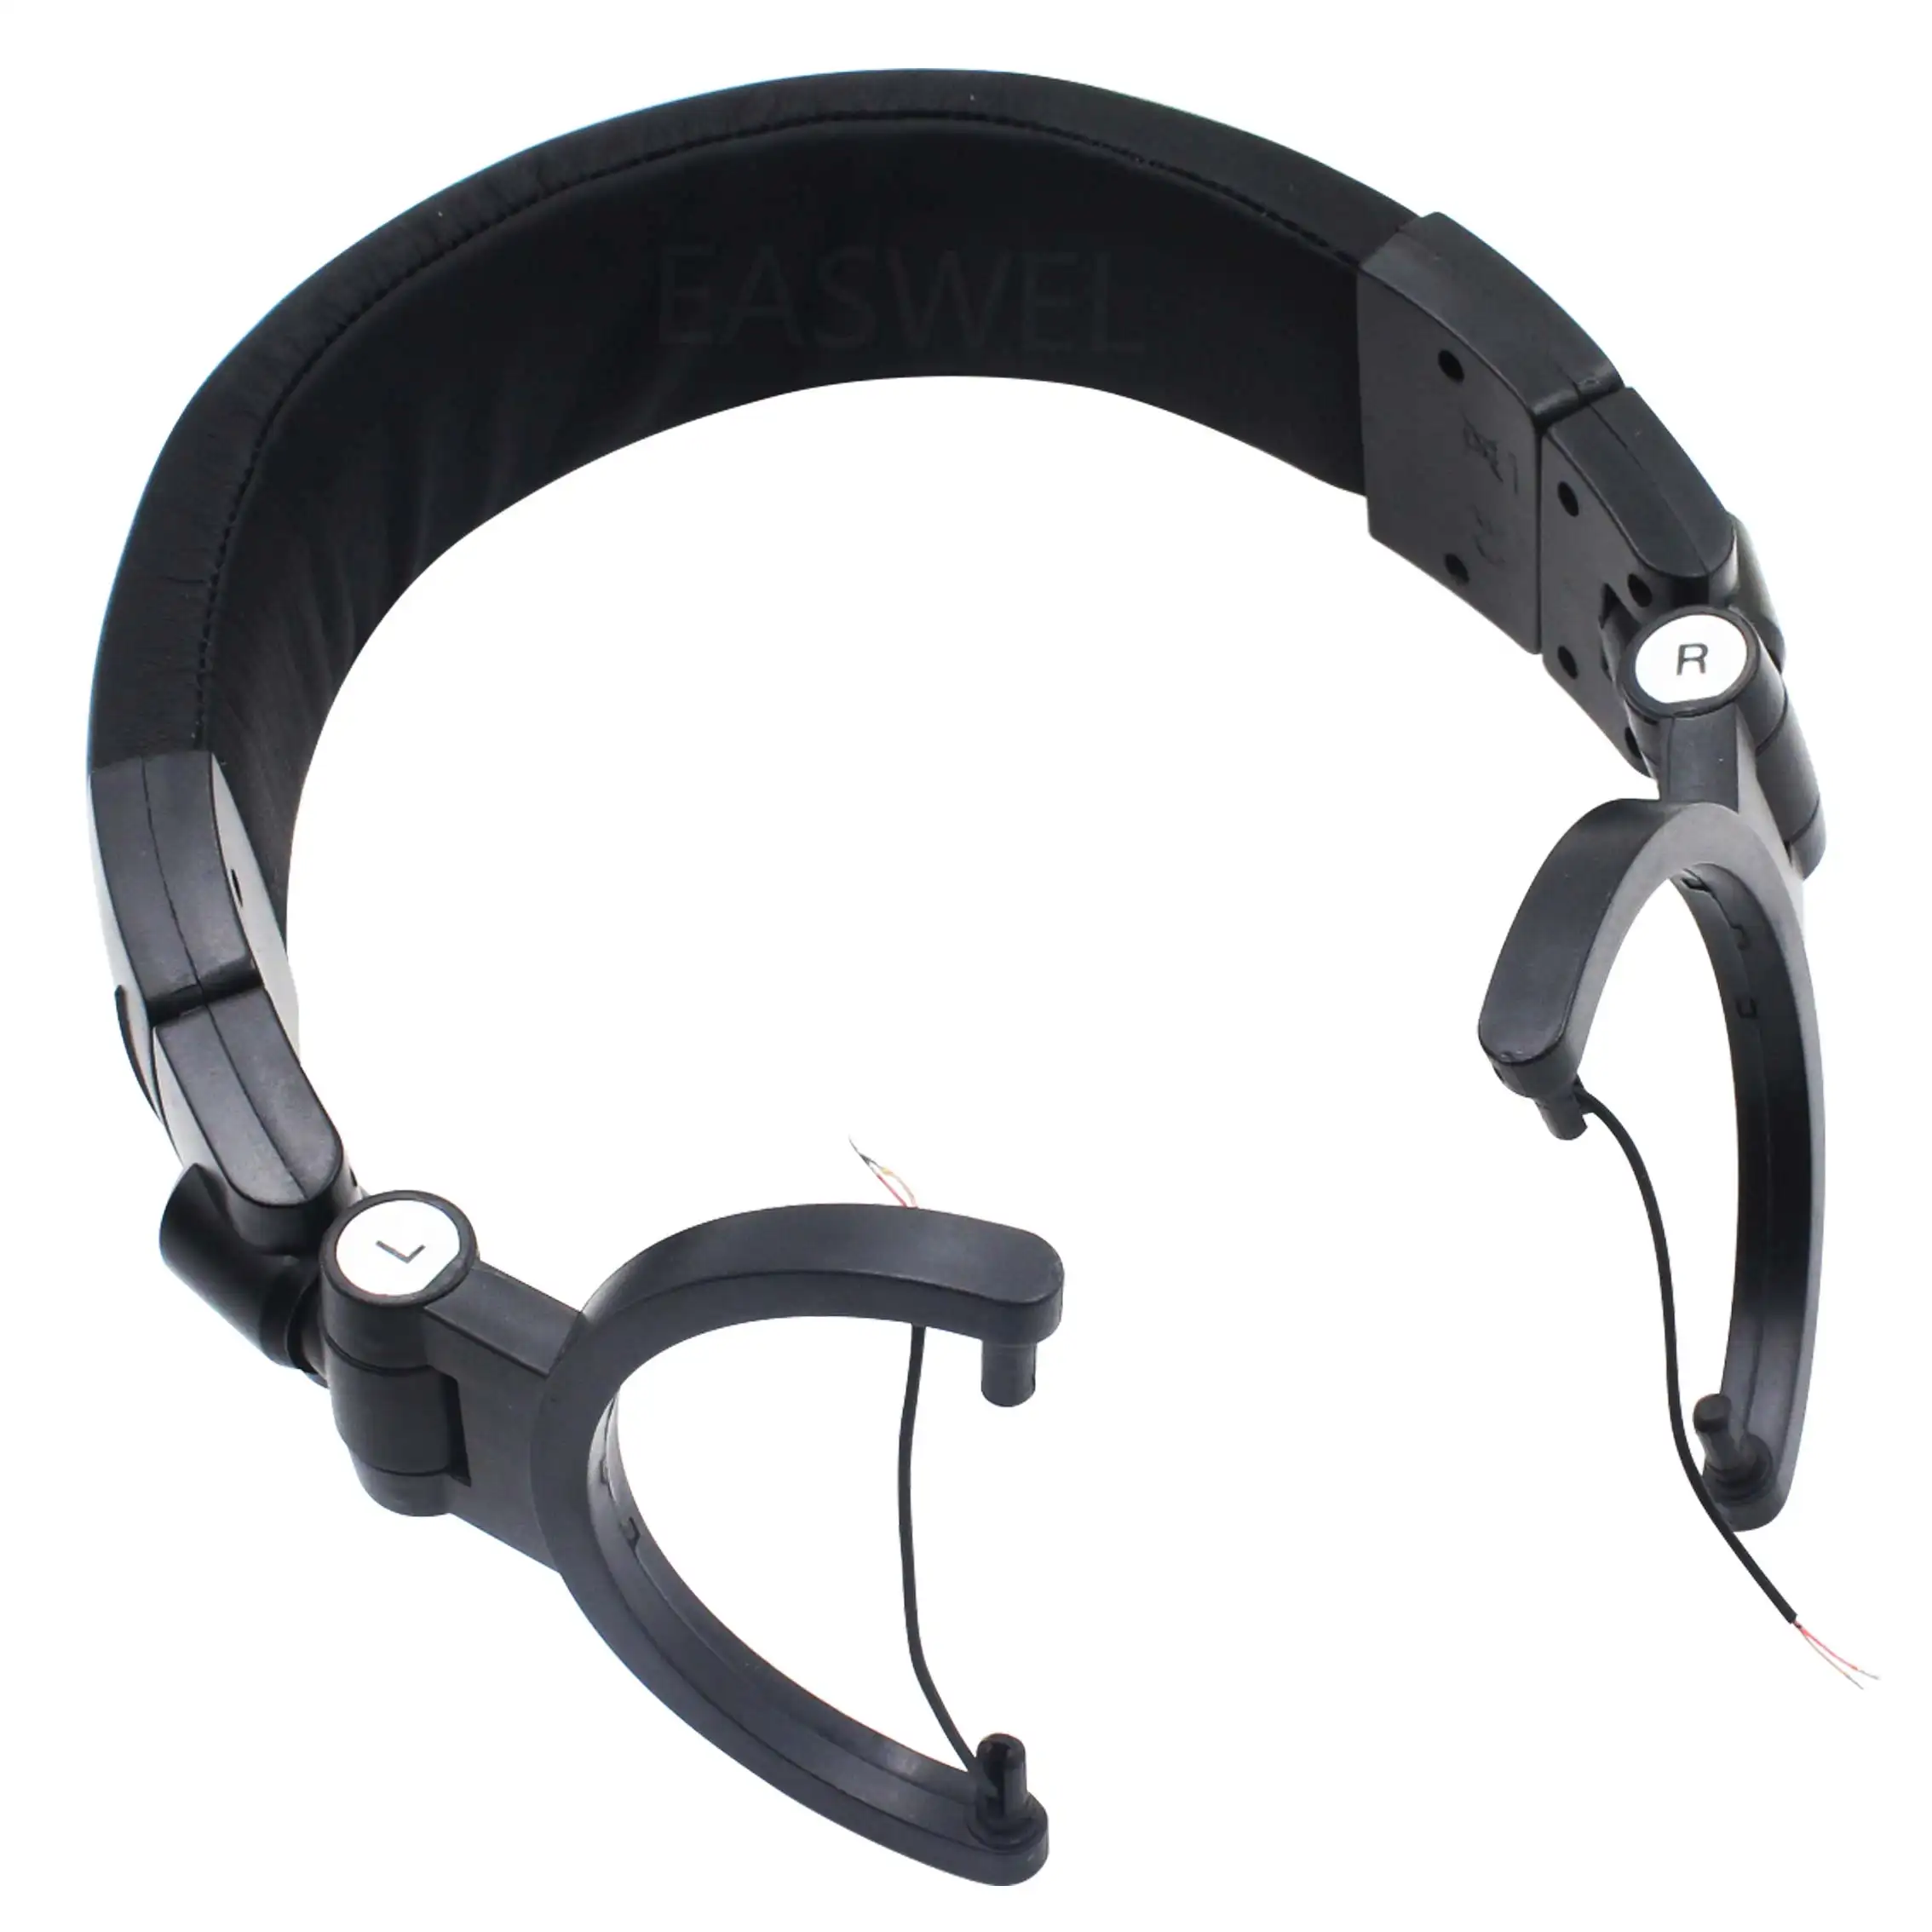 Replacement Headband Cushion Hook For Audio technica ath-M50 ATH-M50 Headphones